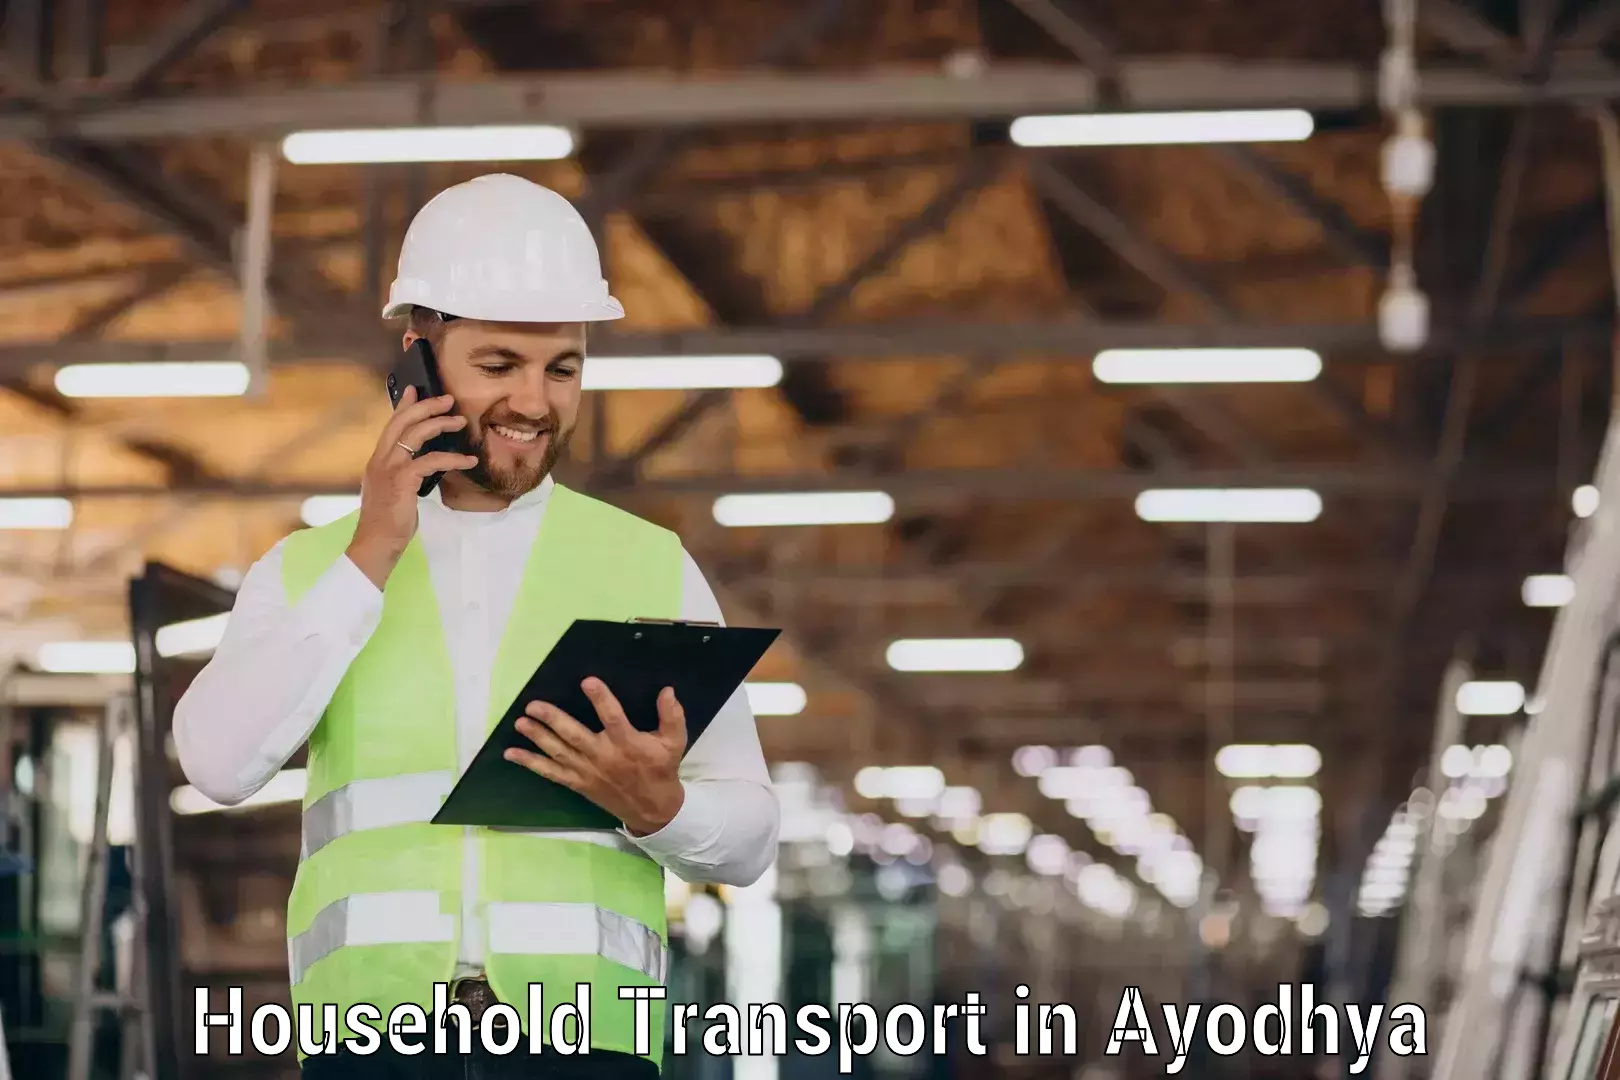 Trusted moving company in Ayodhya